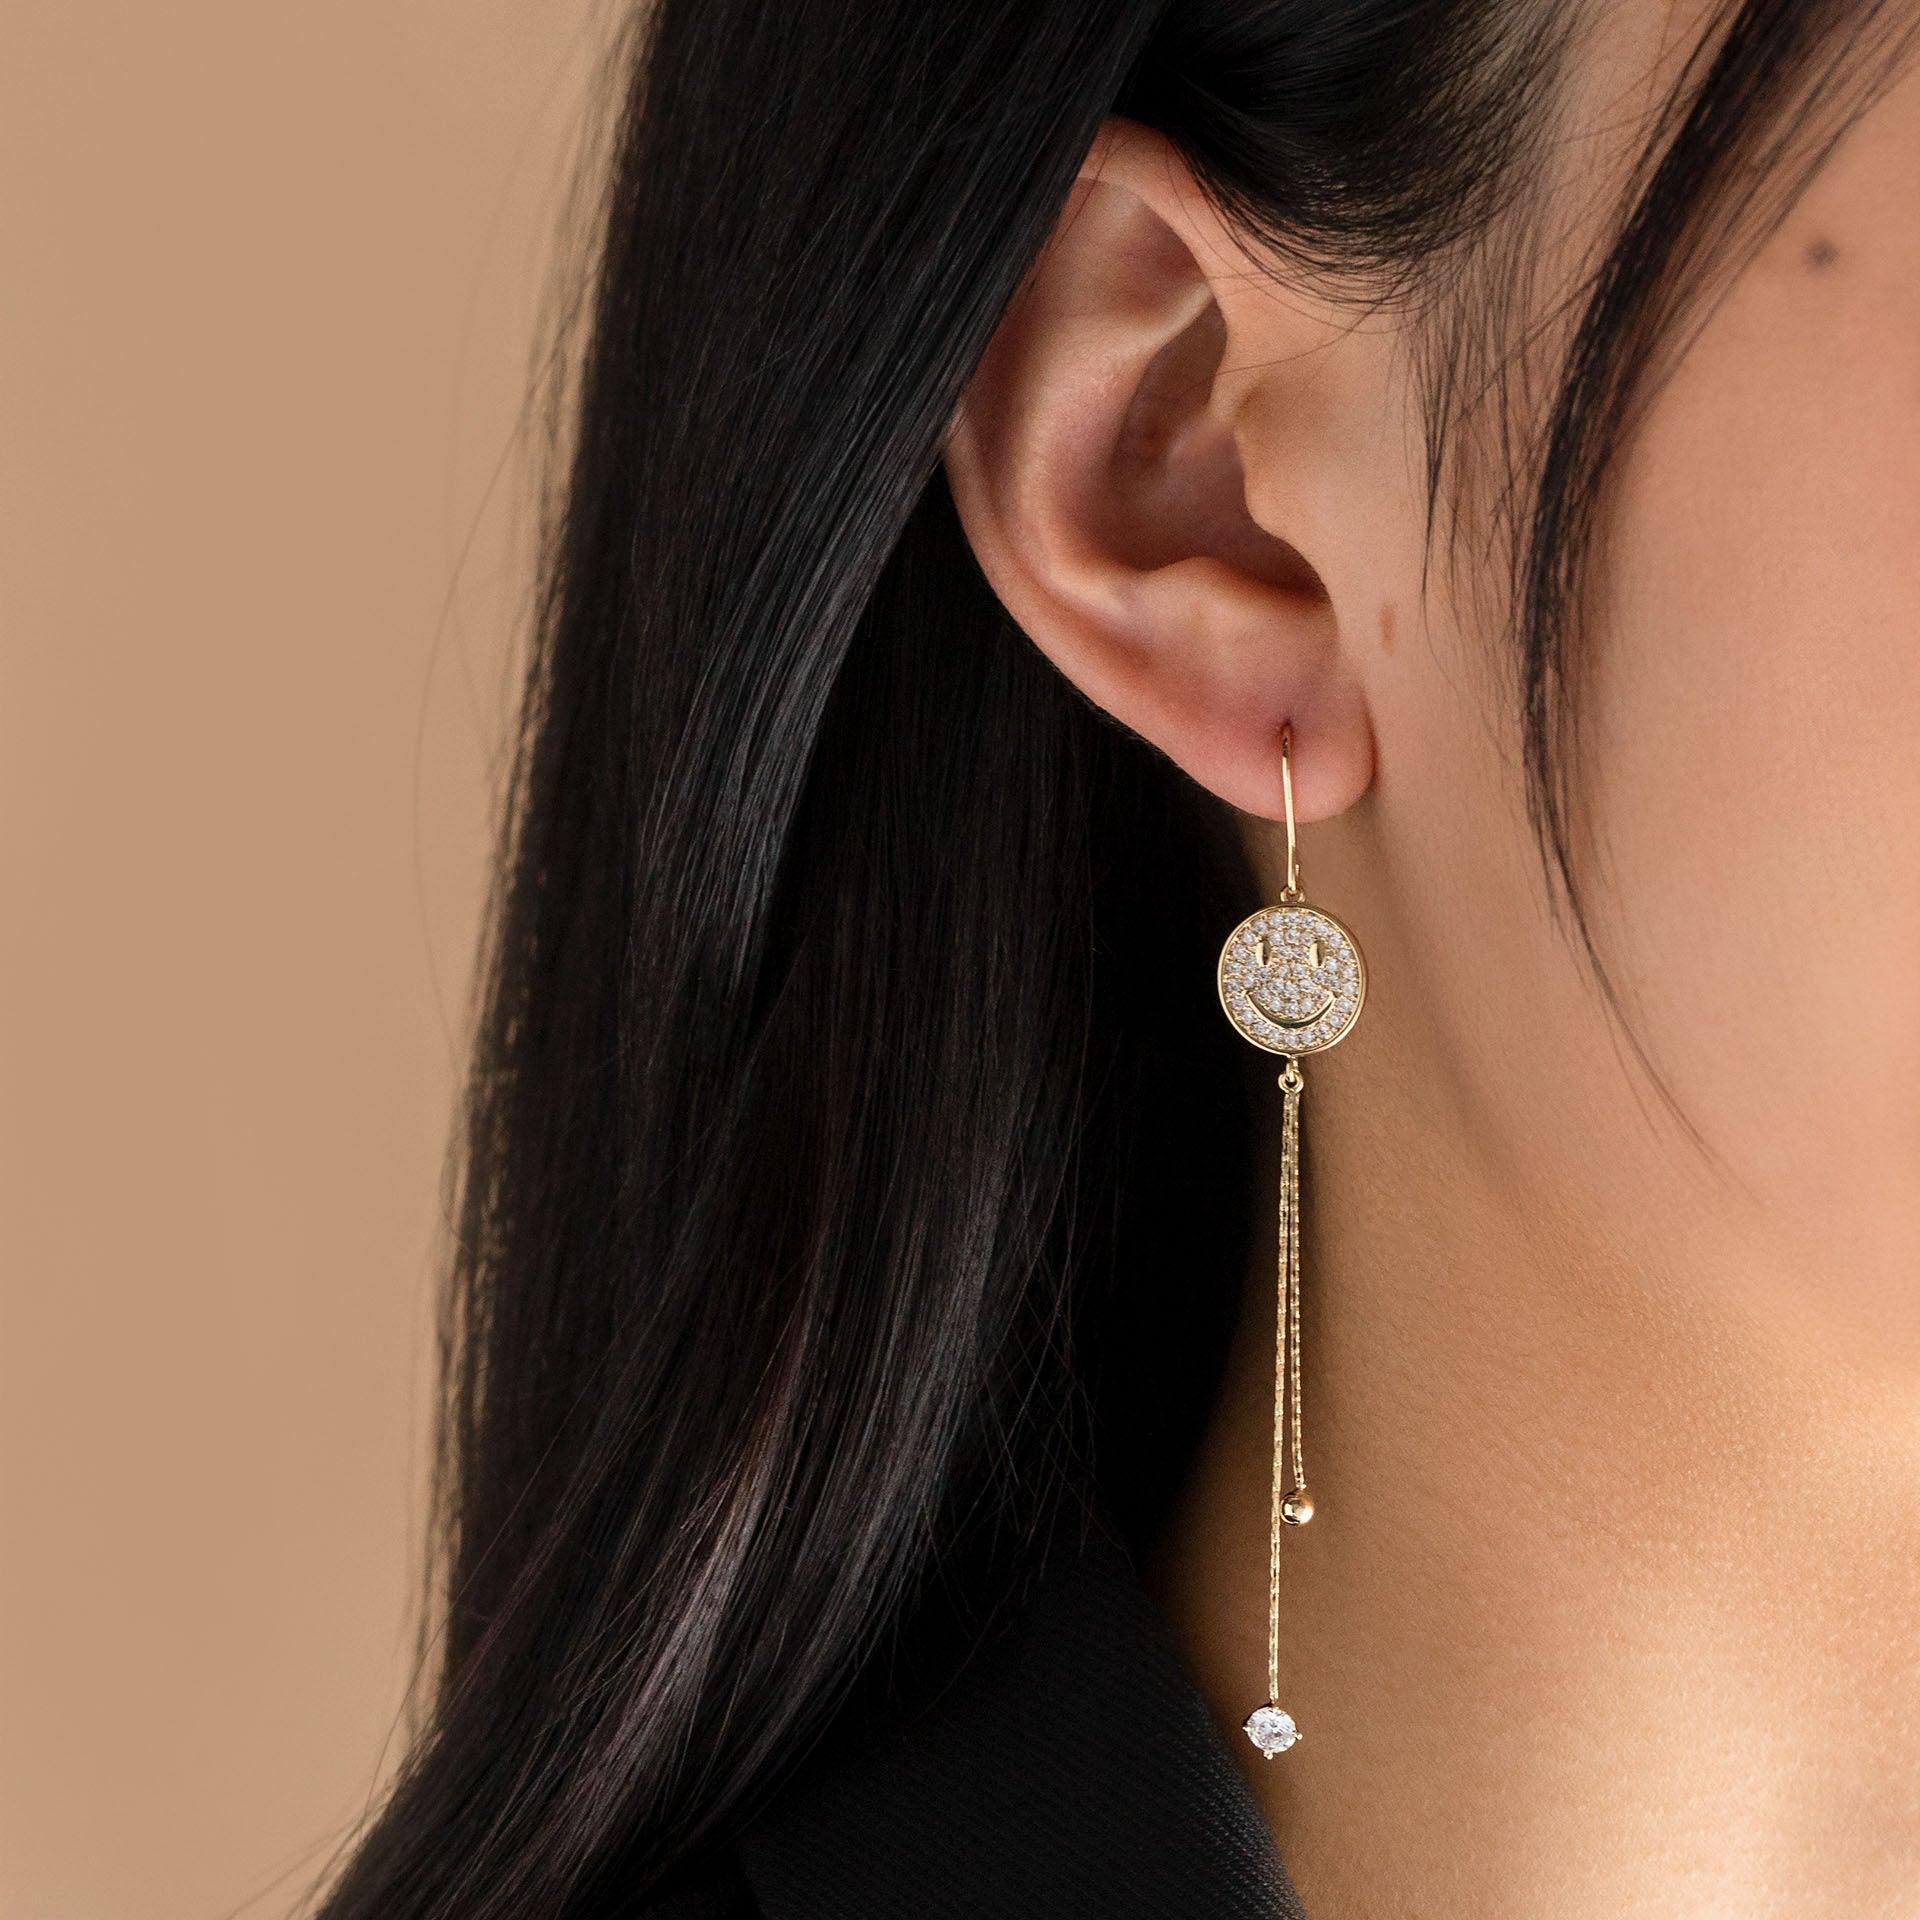 Tips on Finding the Perfect Pair of Earrings